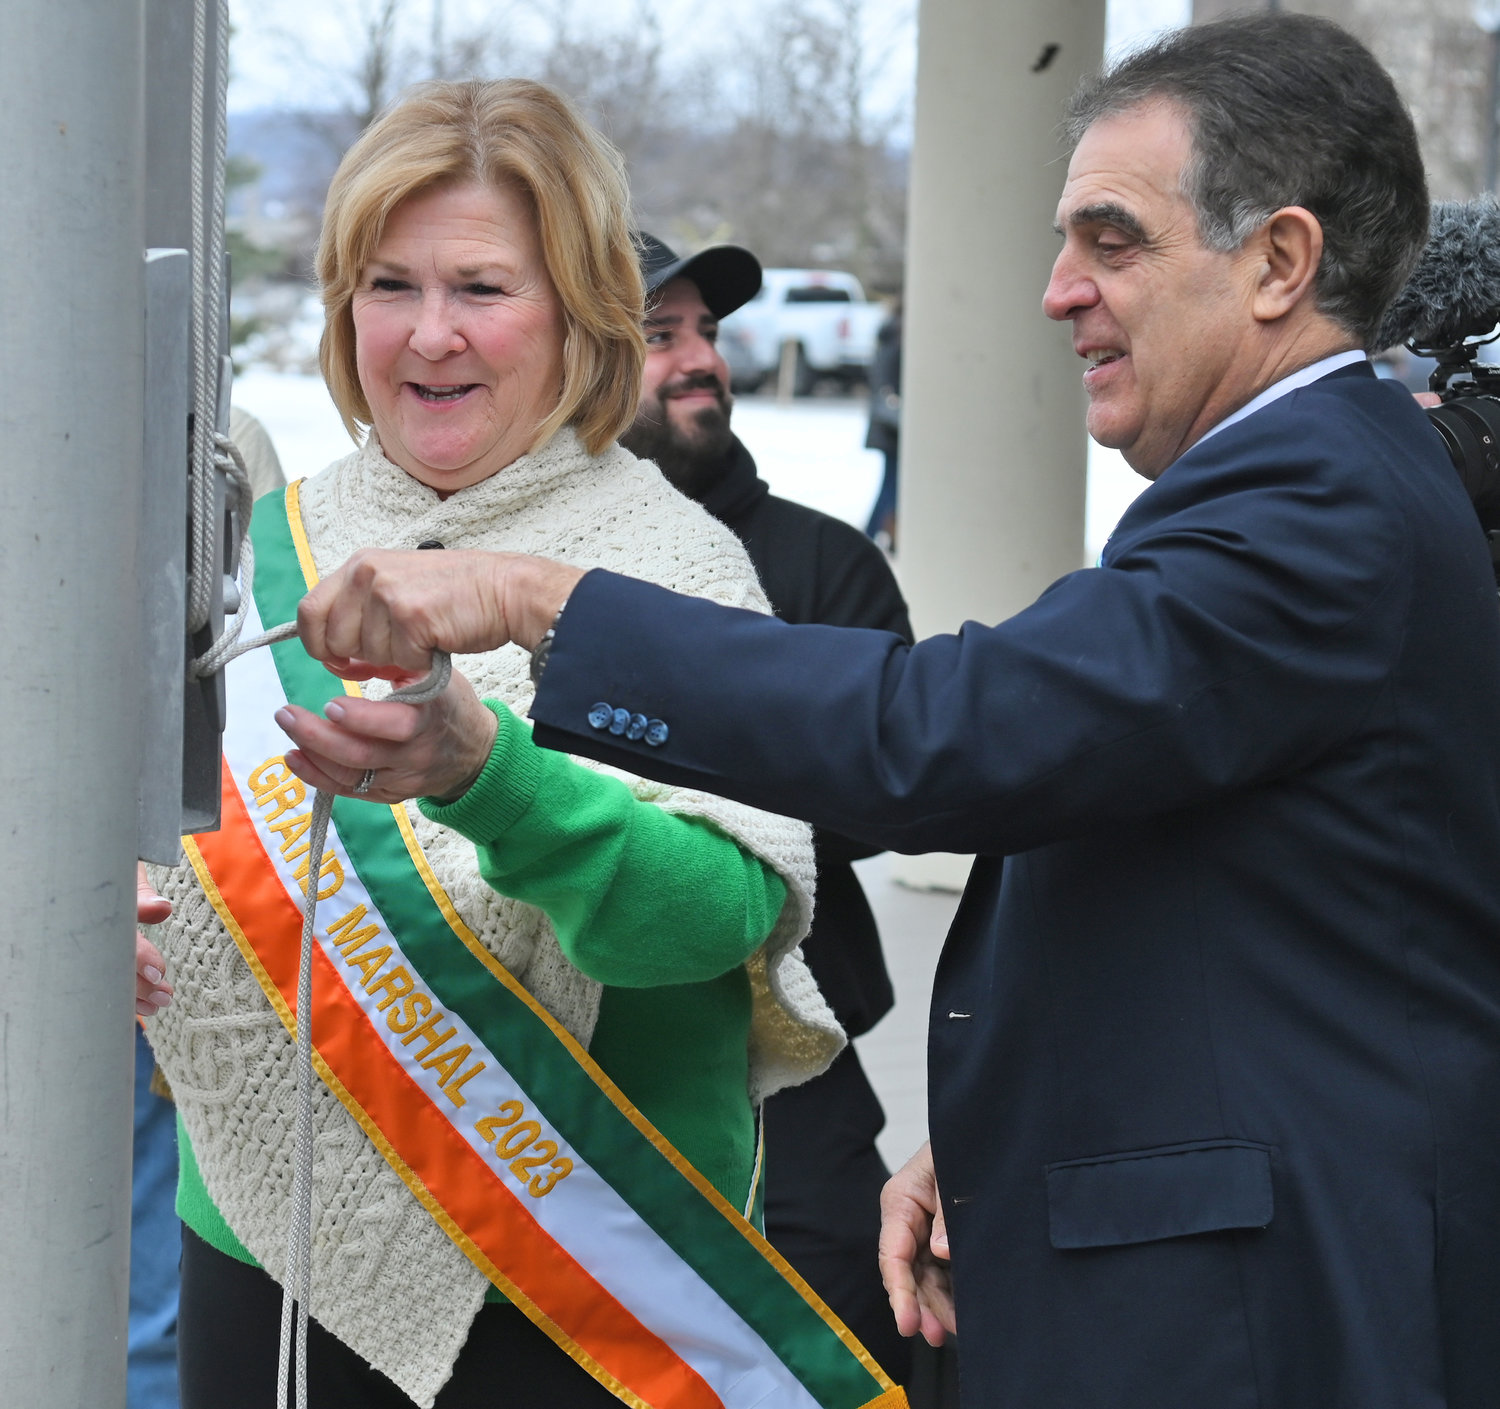 ALL SECURE — Utica St. Patrick’s Day Parade Grand Marshal Colleen Kain Martin and Mayor Robert Palmieri secure the rope used to raise the Irish flag over city hall on Wednesday.